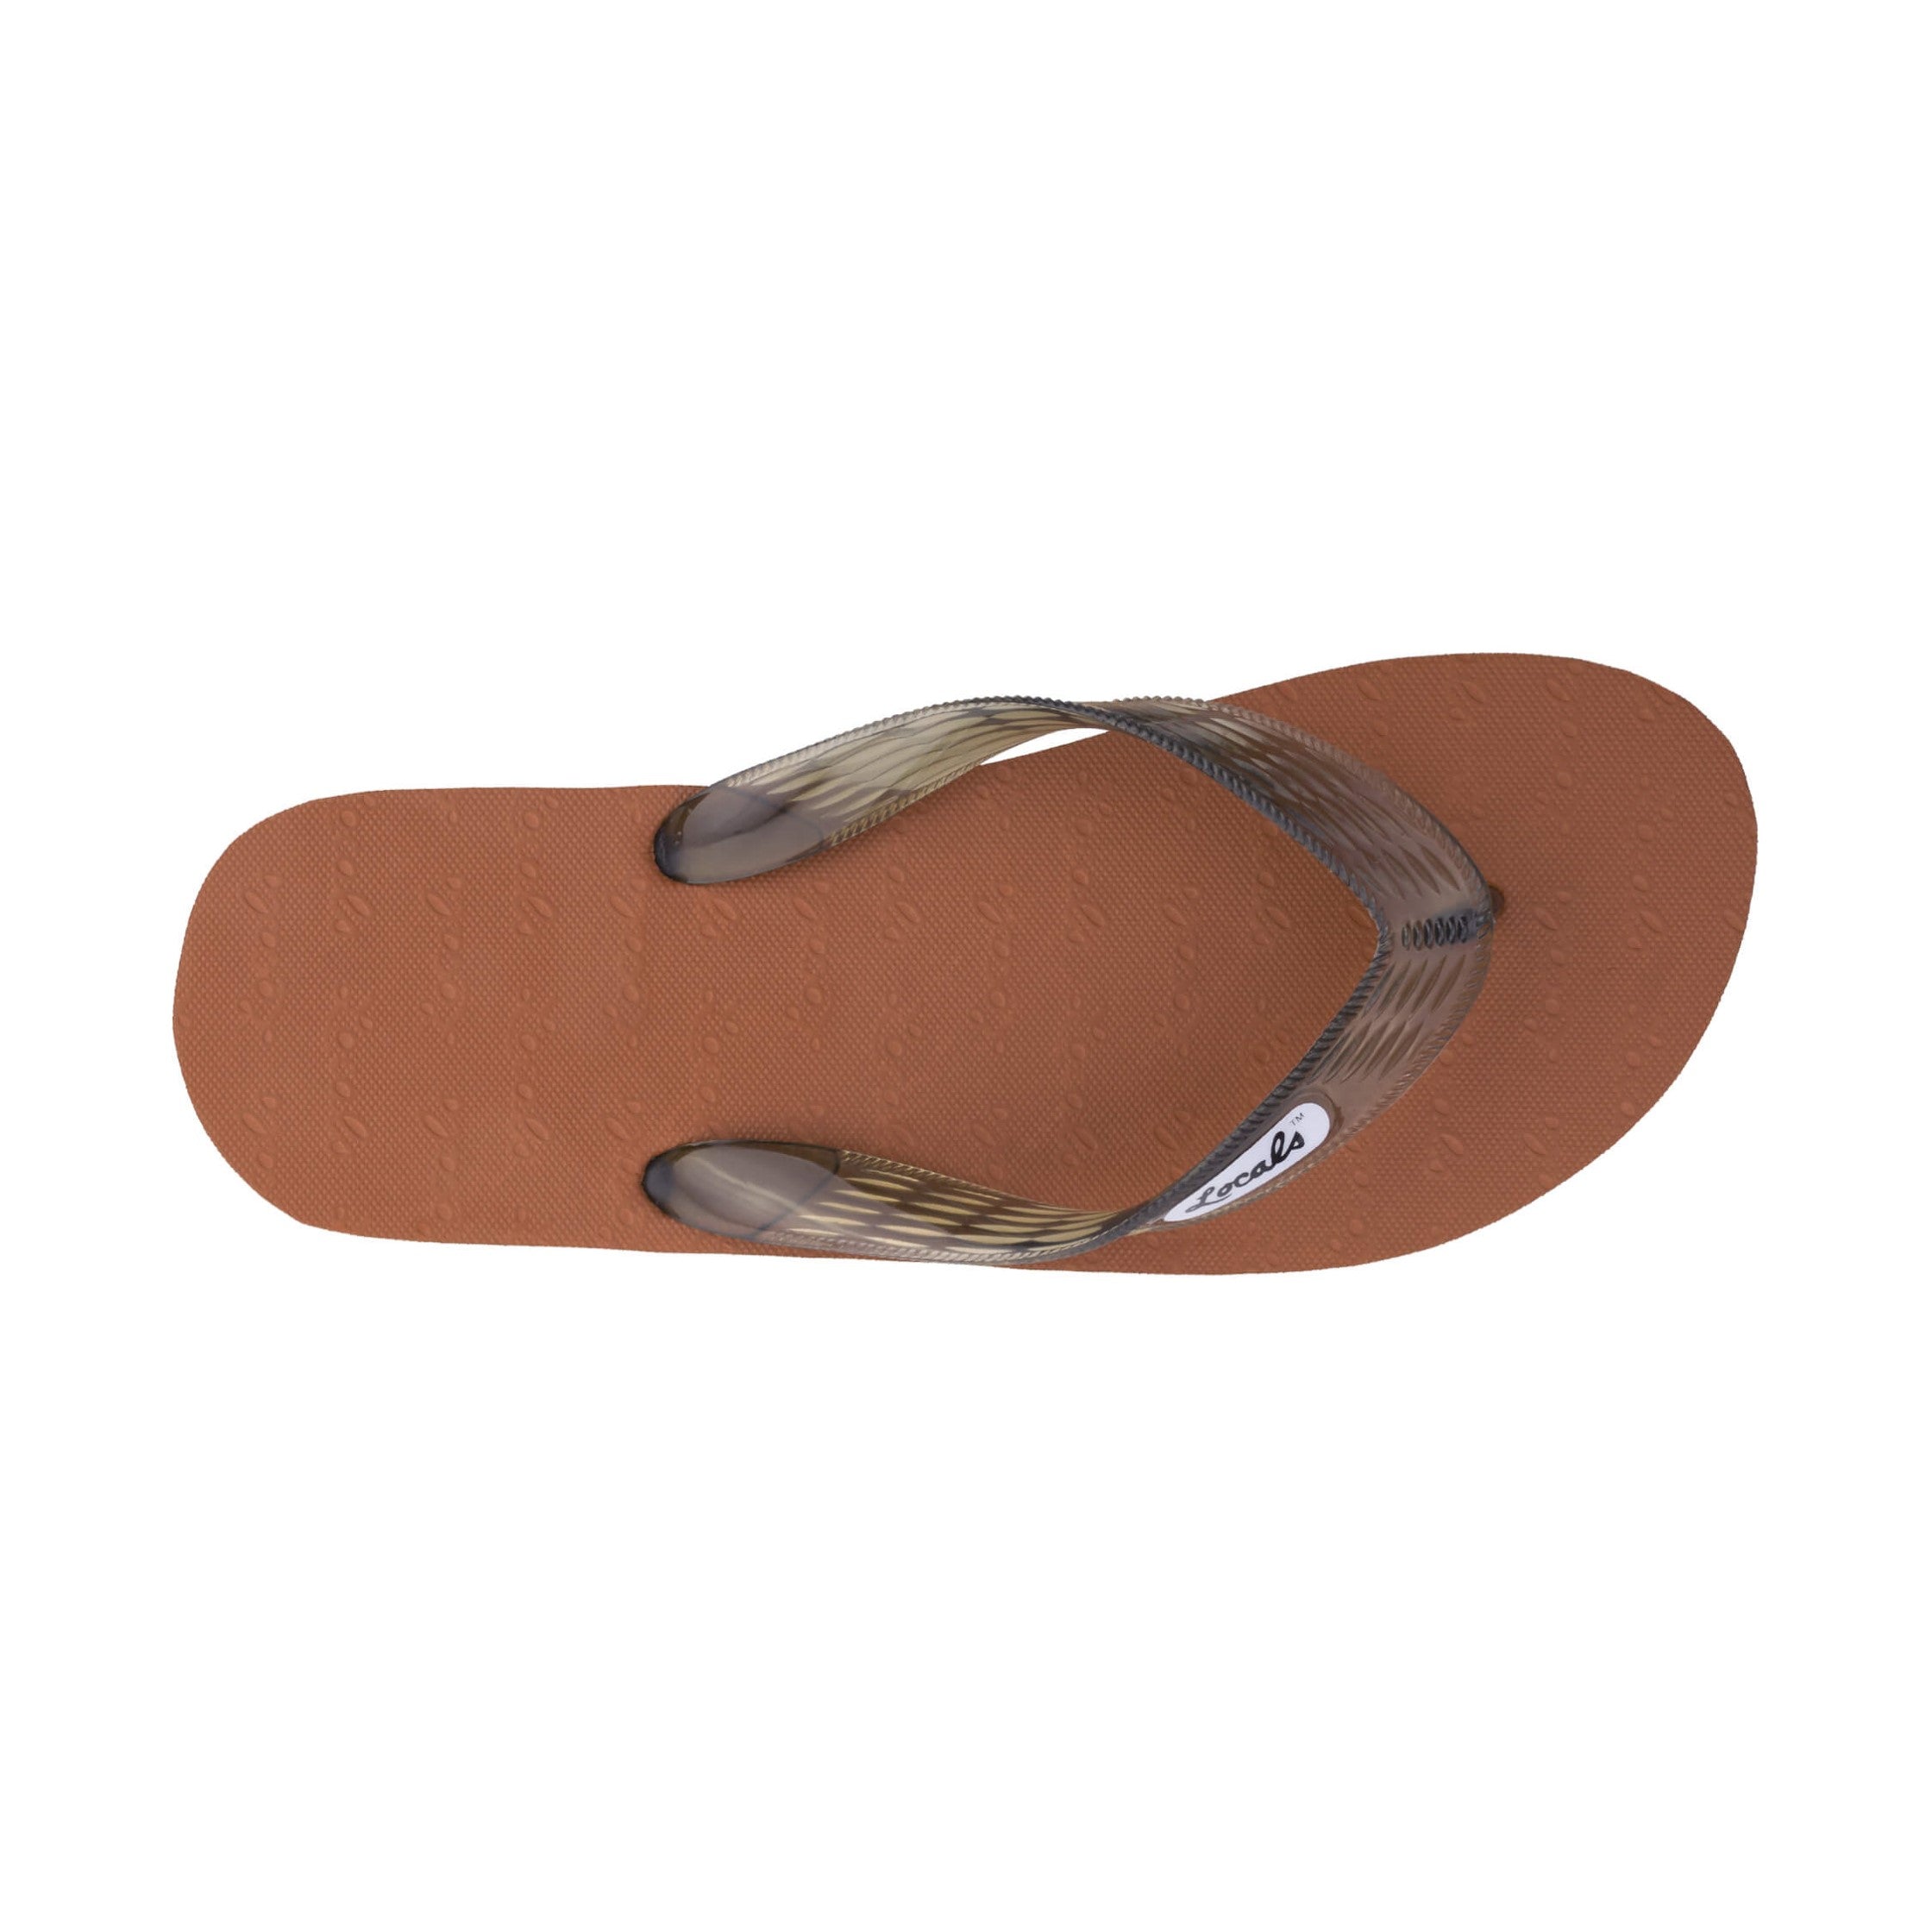 Locals Unisex Stripe Brown Flip Flops featuring a Brown platform with a White stripe and a Translucent Brown strap.